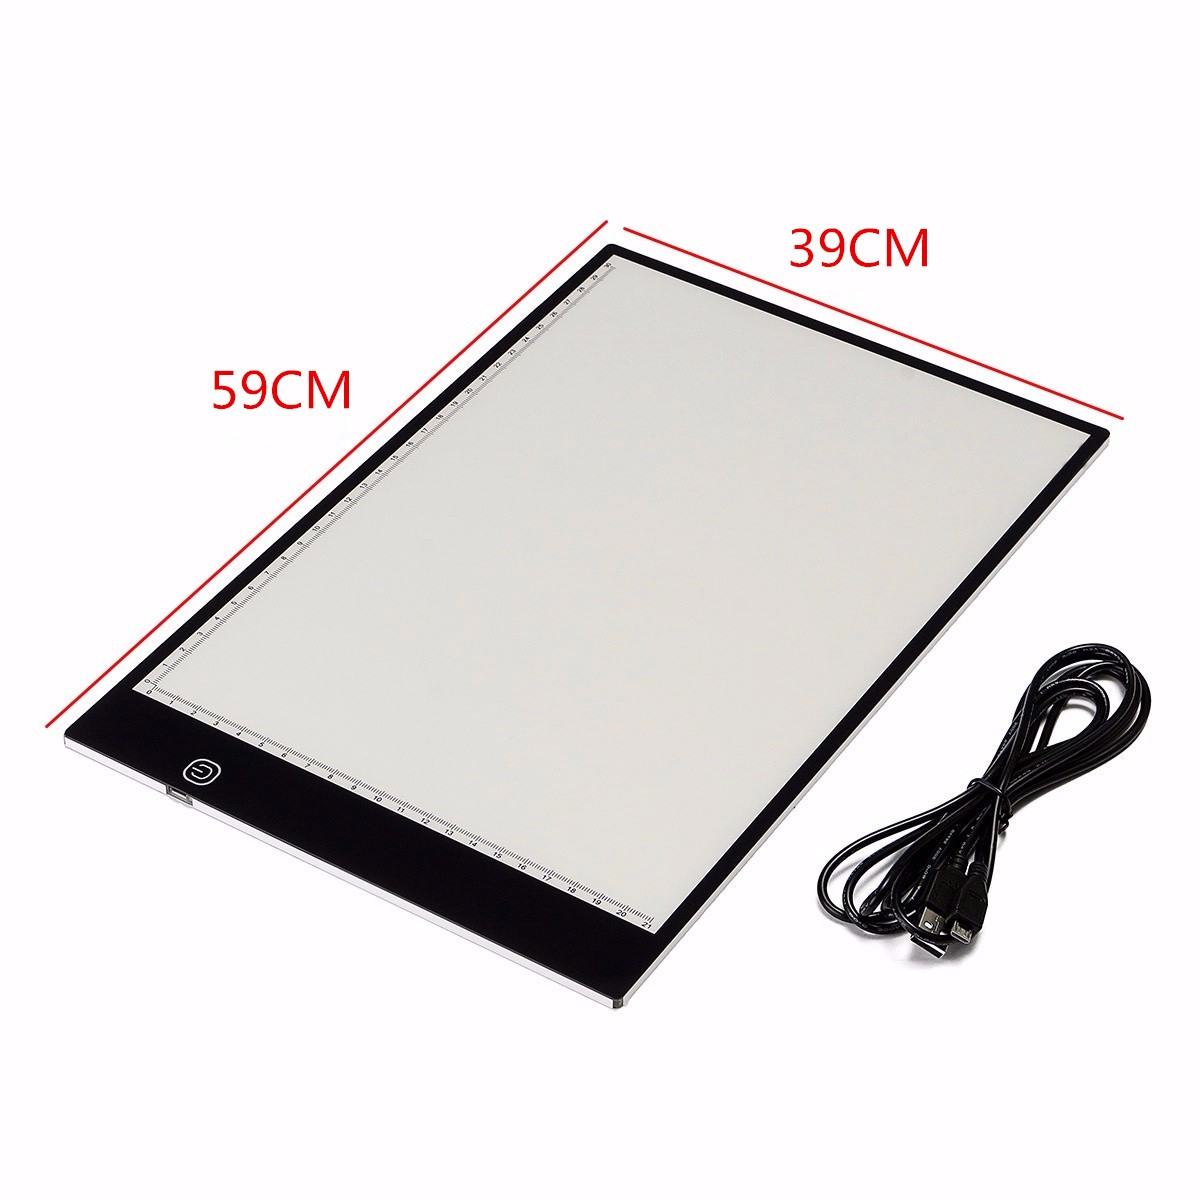 MWay-Ultra-Thin-A2-A3-LED-Copy-With-USB-Cable-Adjustable-Brightness-Drawing-Pad-Copy-board-1176197